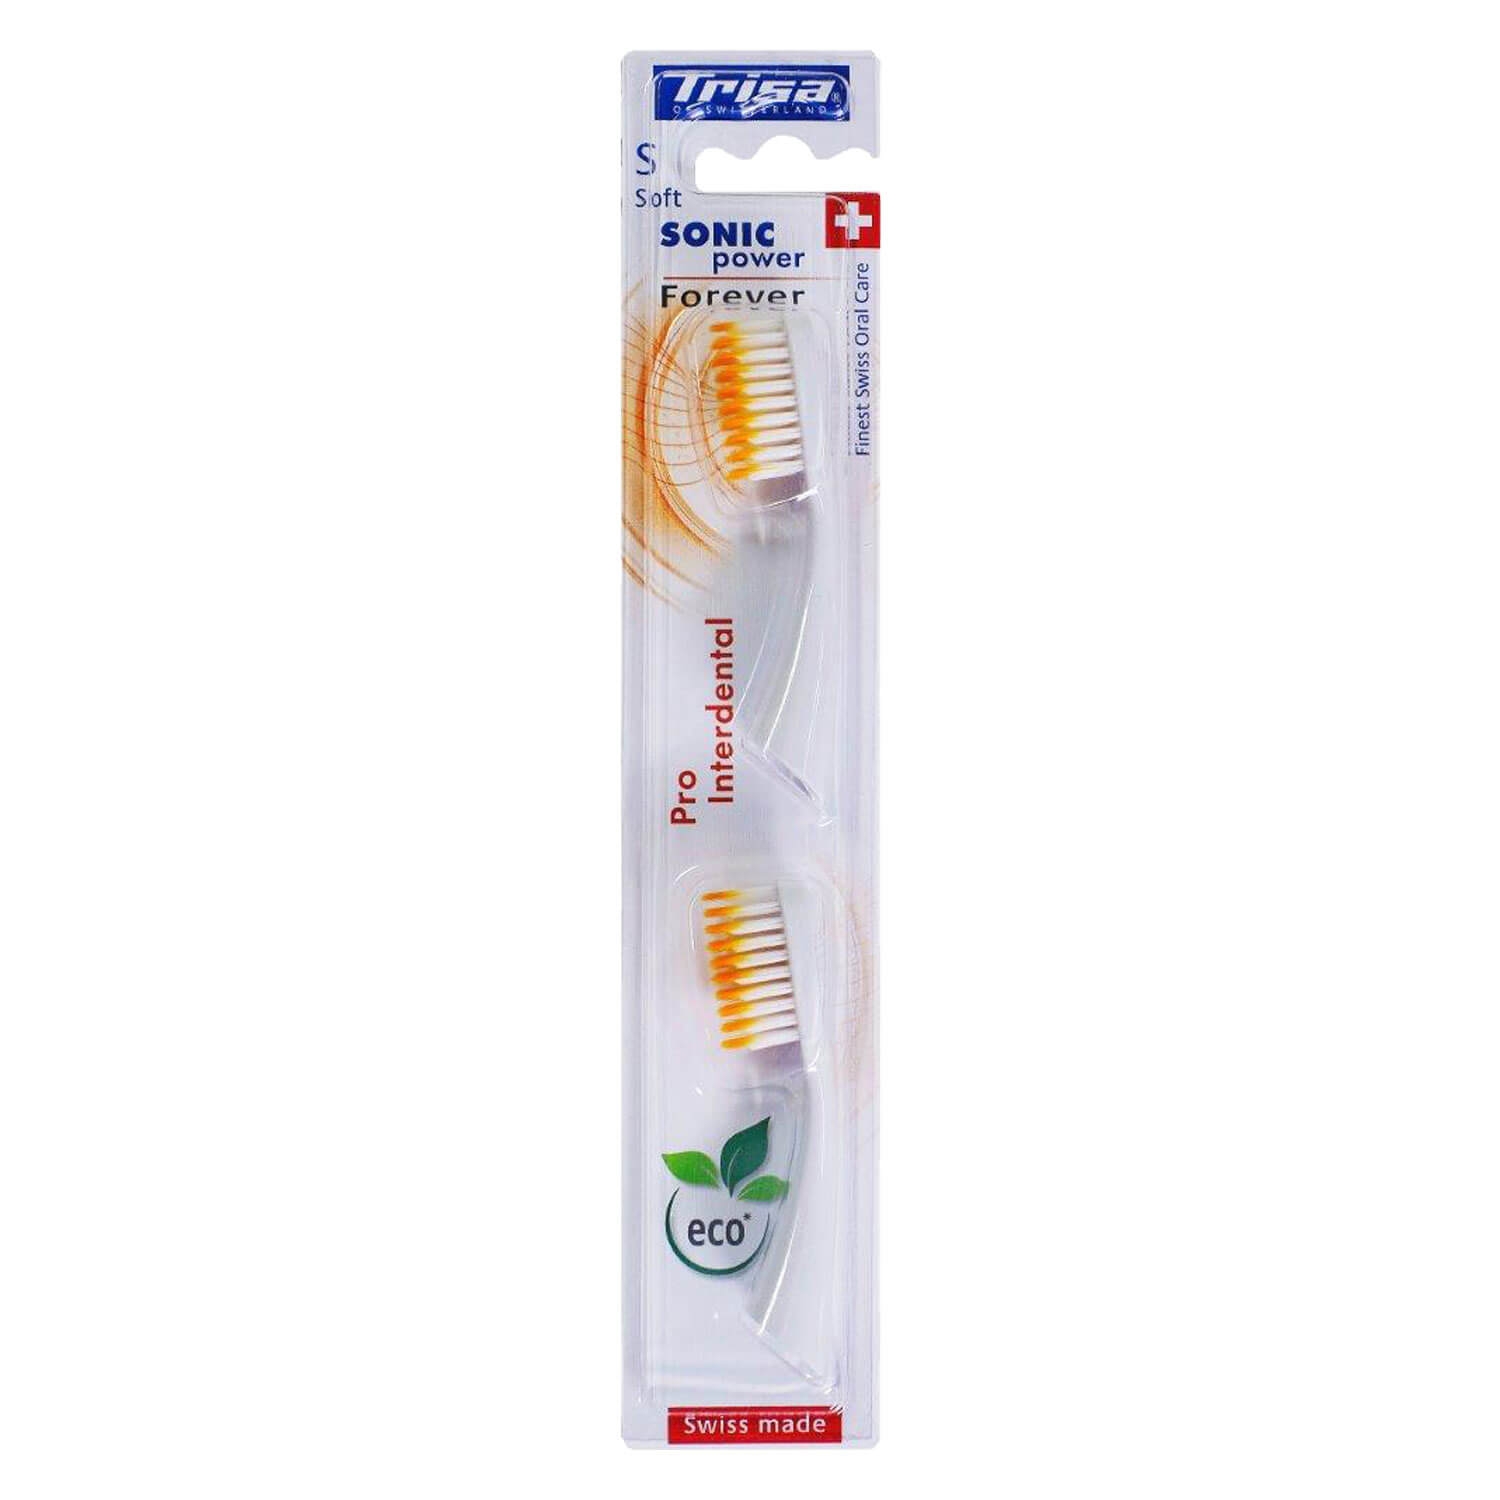 Product image from Trisa Oral Care - Ersatzset Pro Interdental Sonic Power Soft